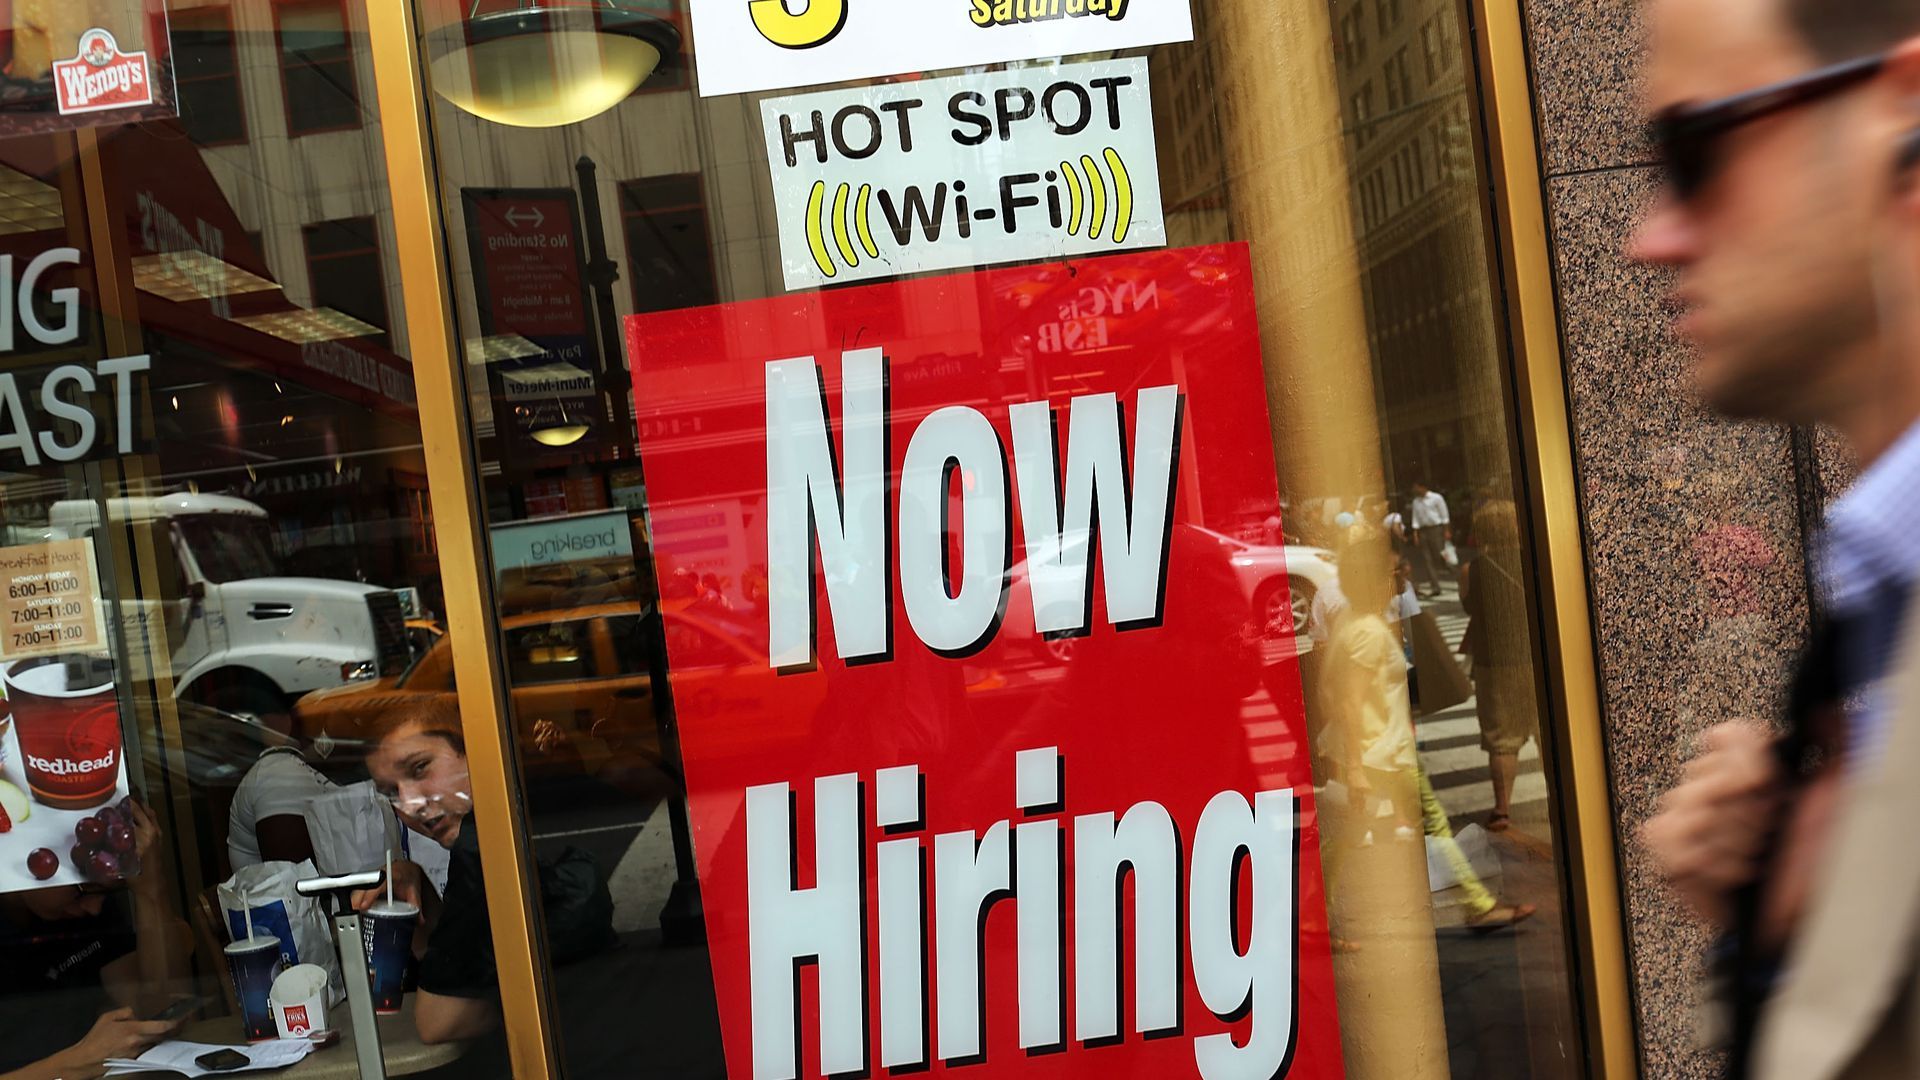 A now hiring sign in a window